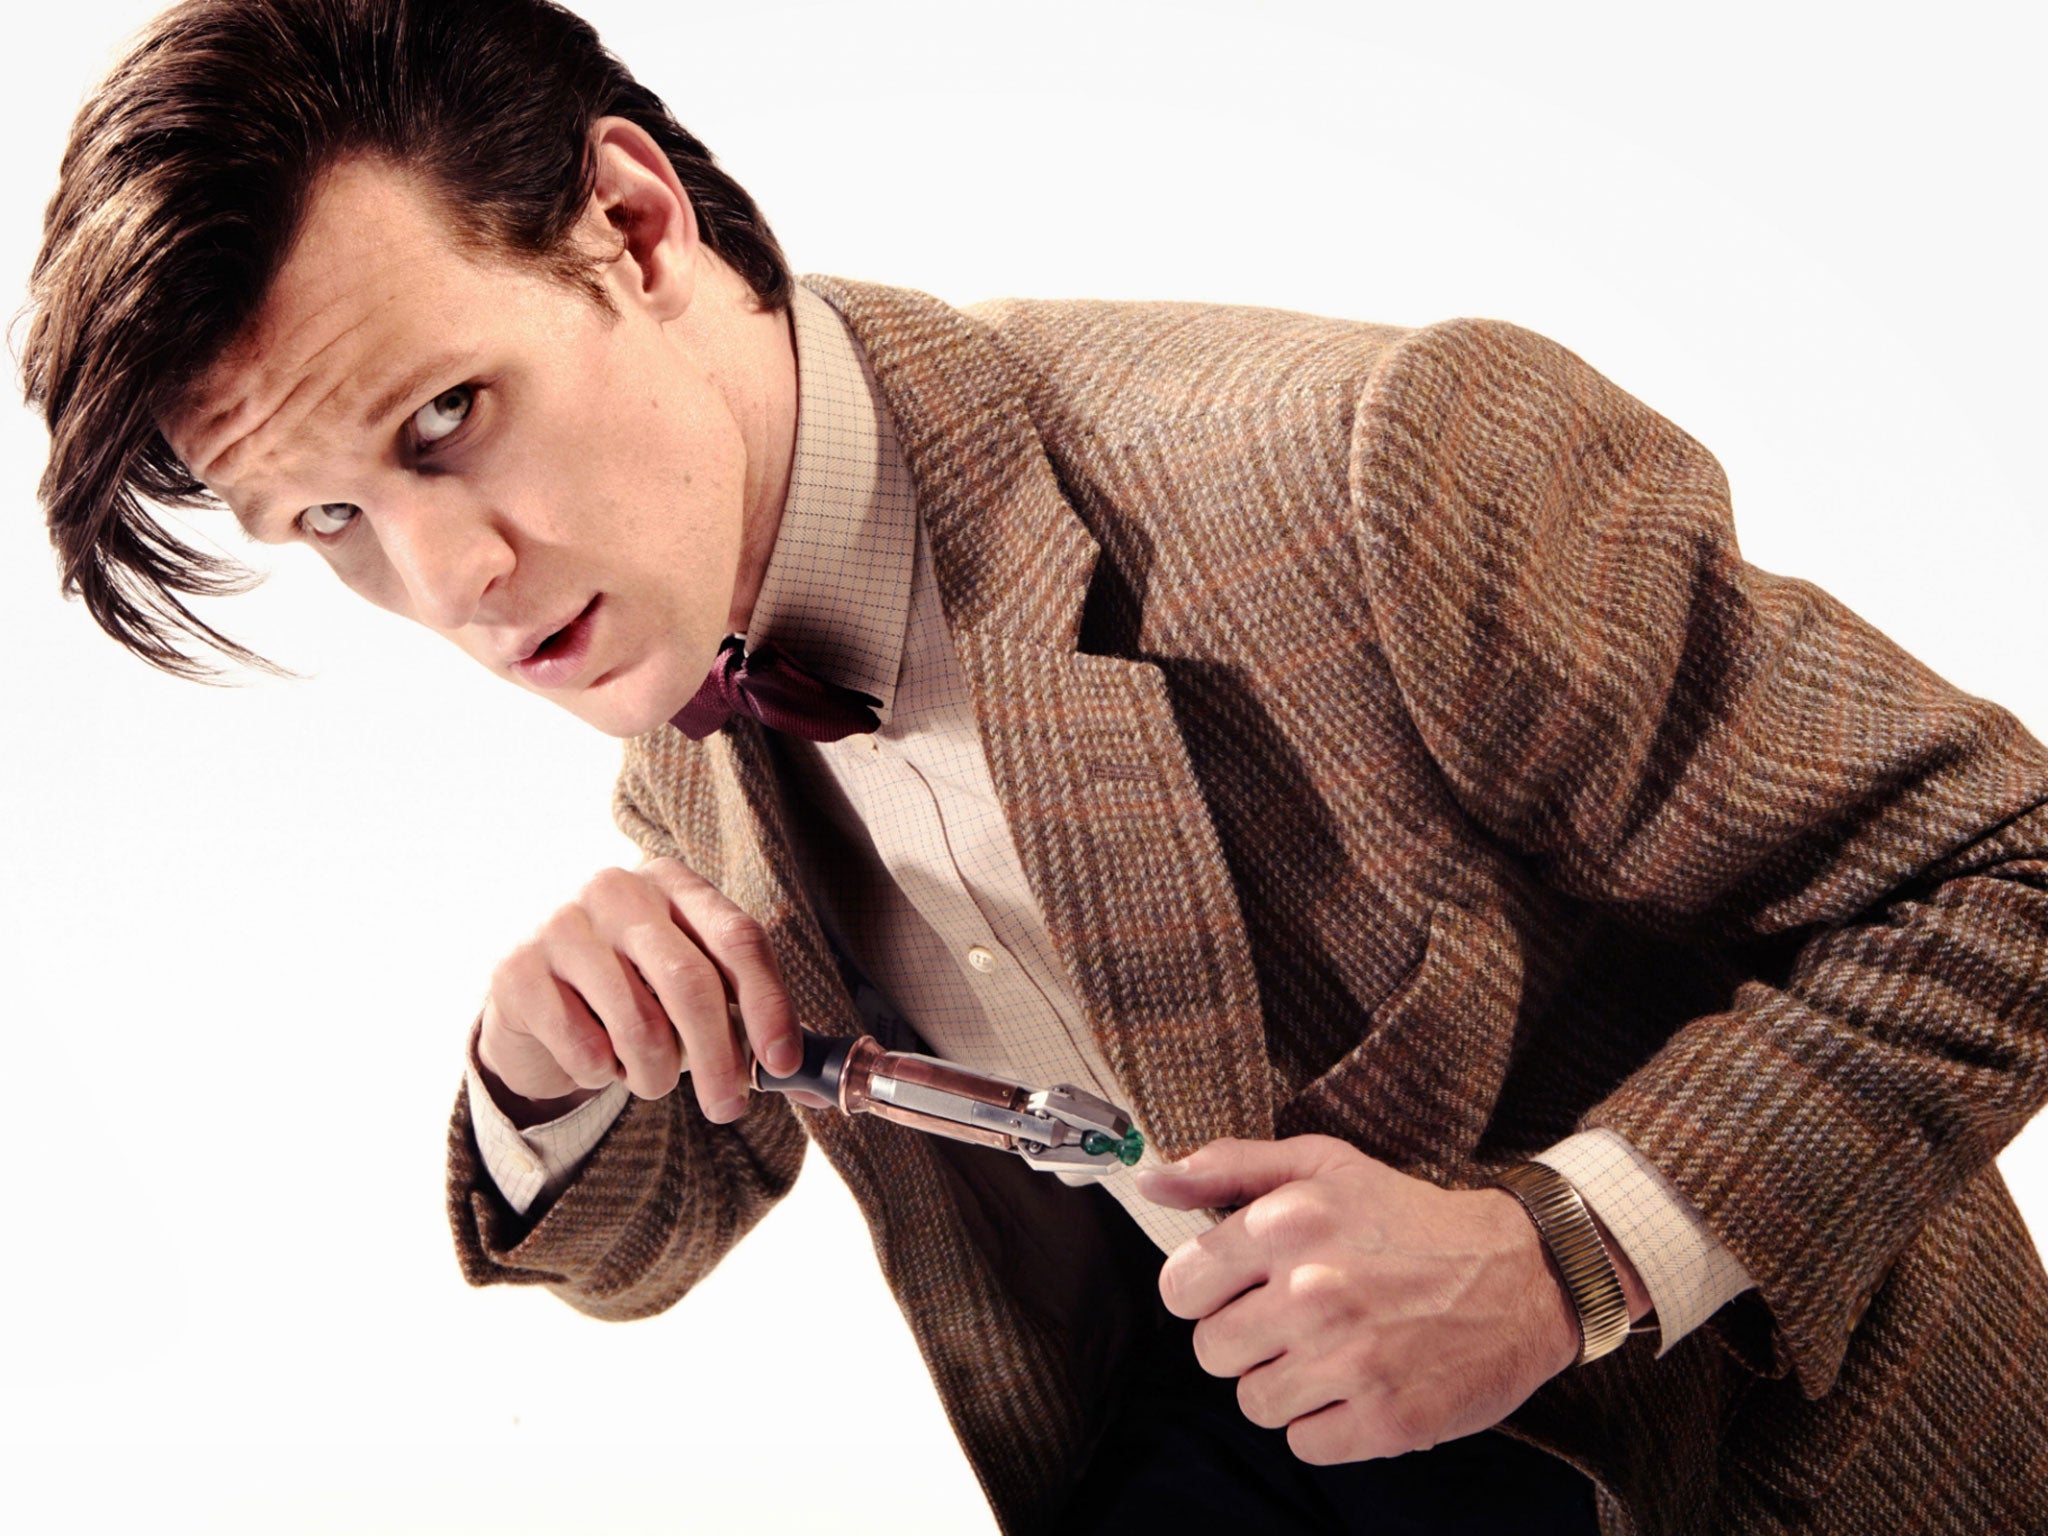 Matt Smith has decided to stand down as Doctor Who